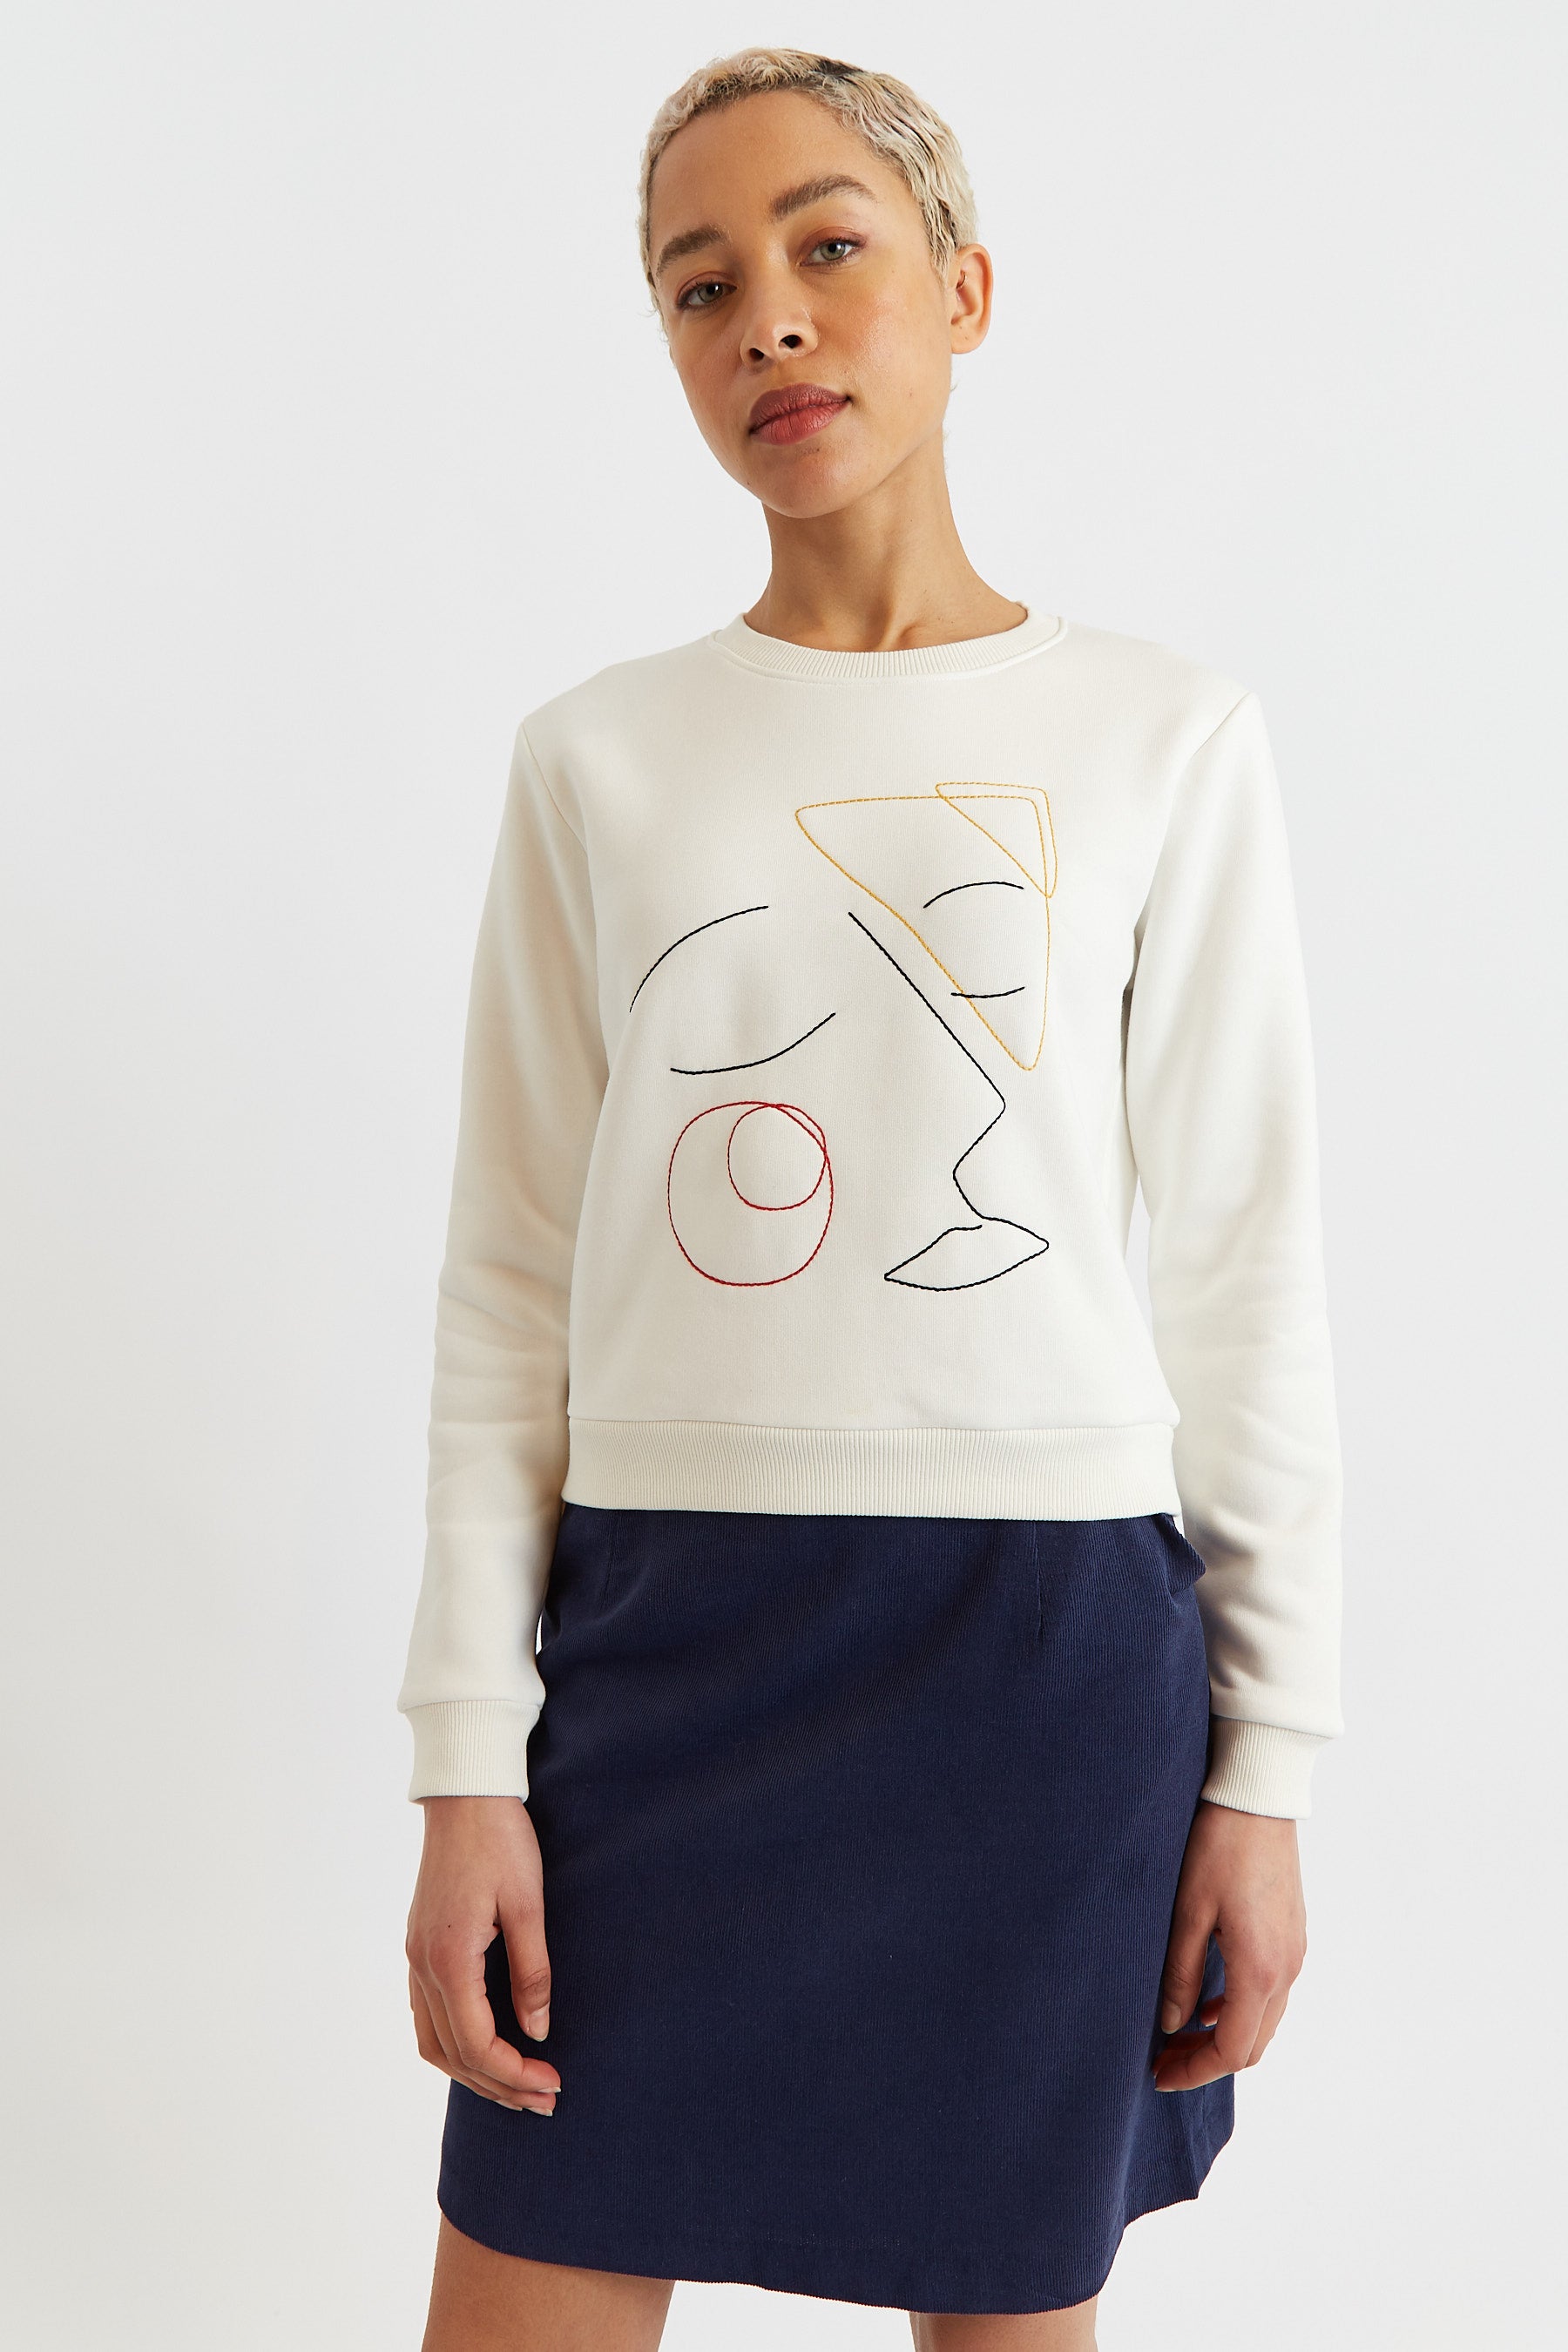 – Off Sweatshirt Embroidered Jan White - Facetime Louche